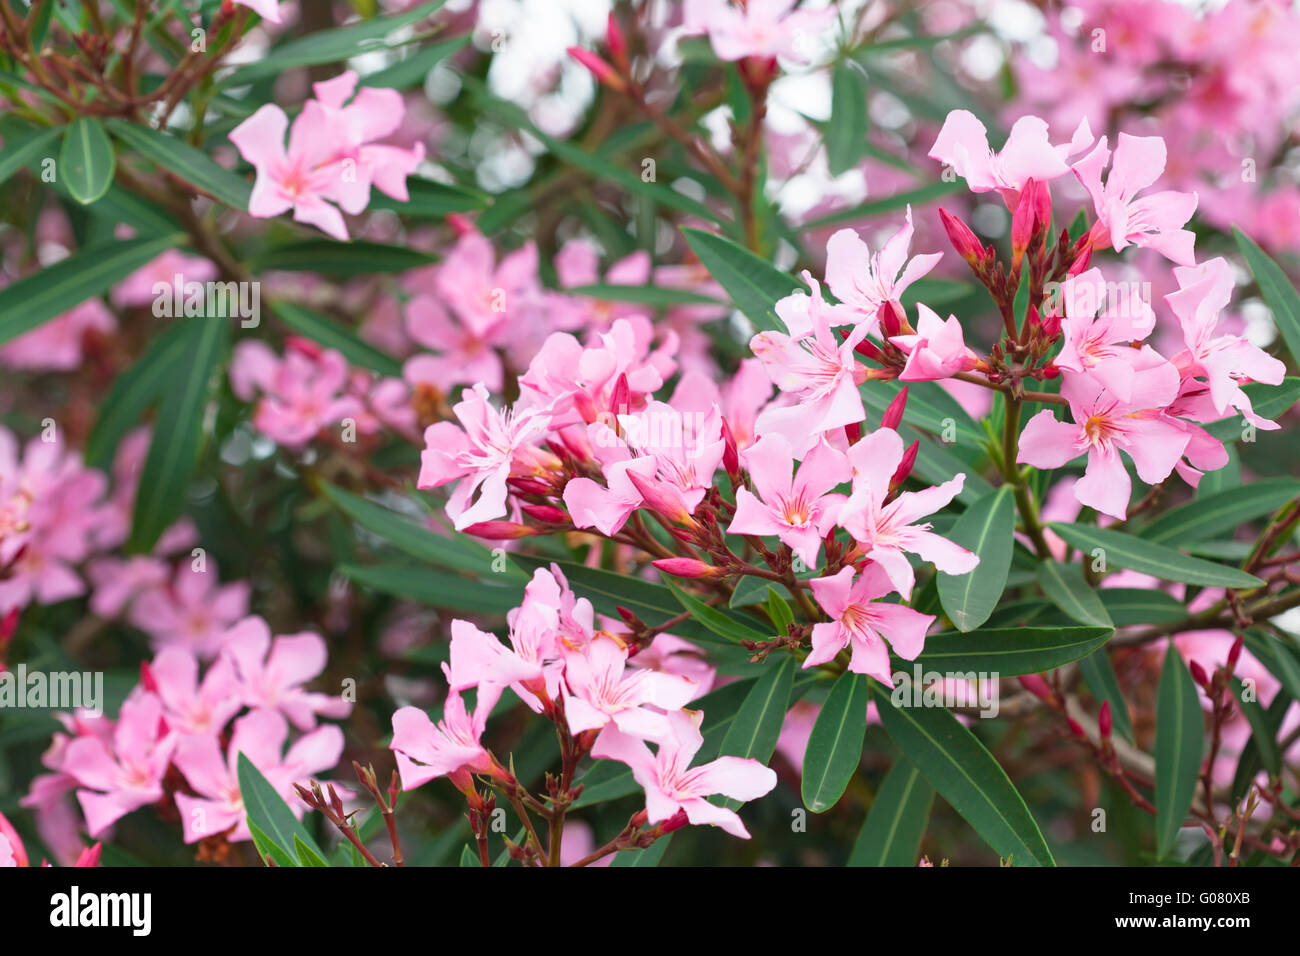 Nerium oleander bush with pink flowers Stock Photo